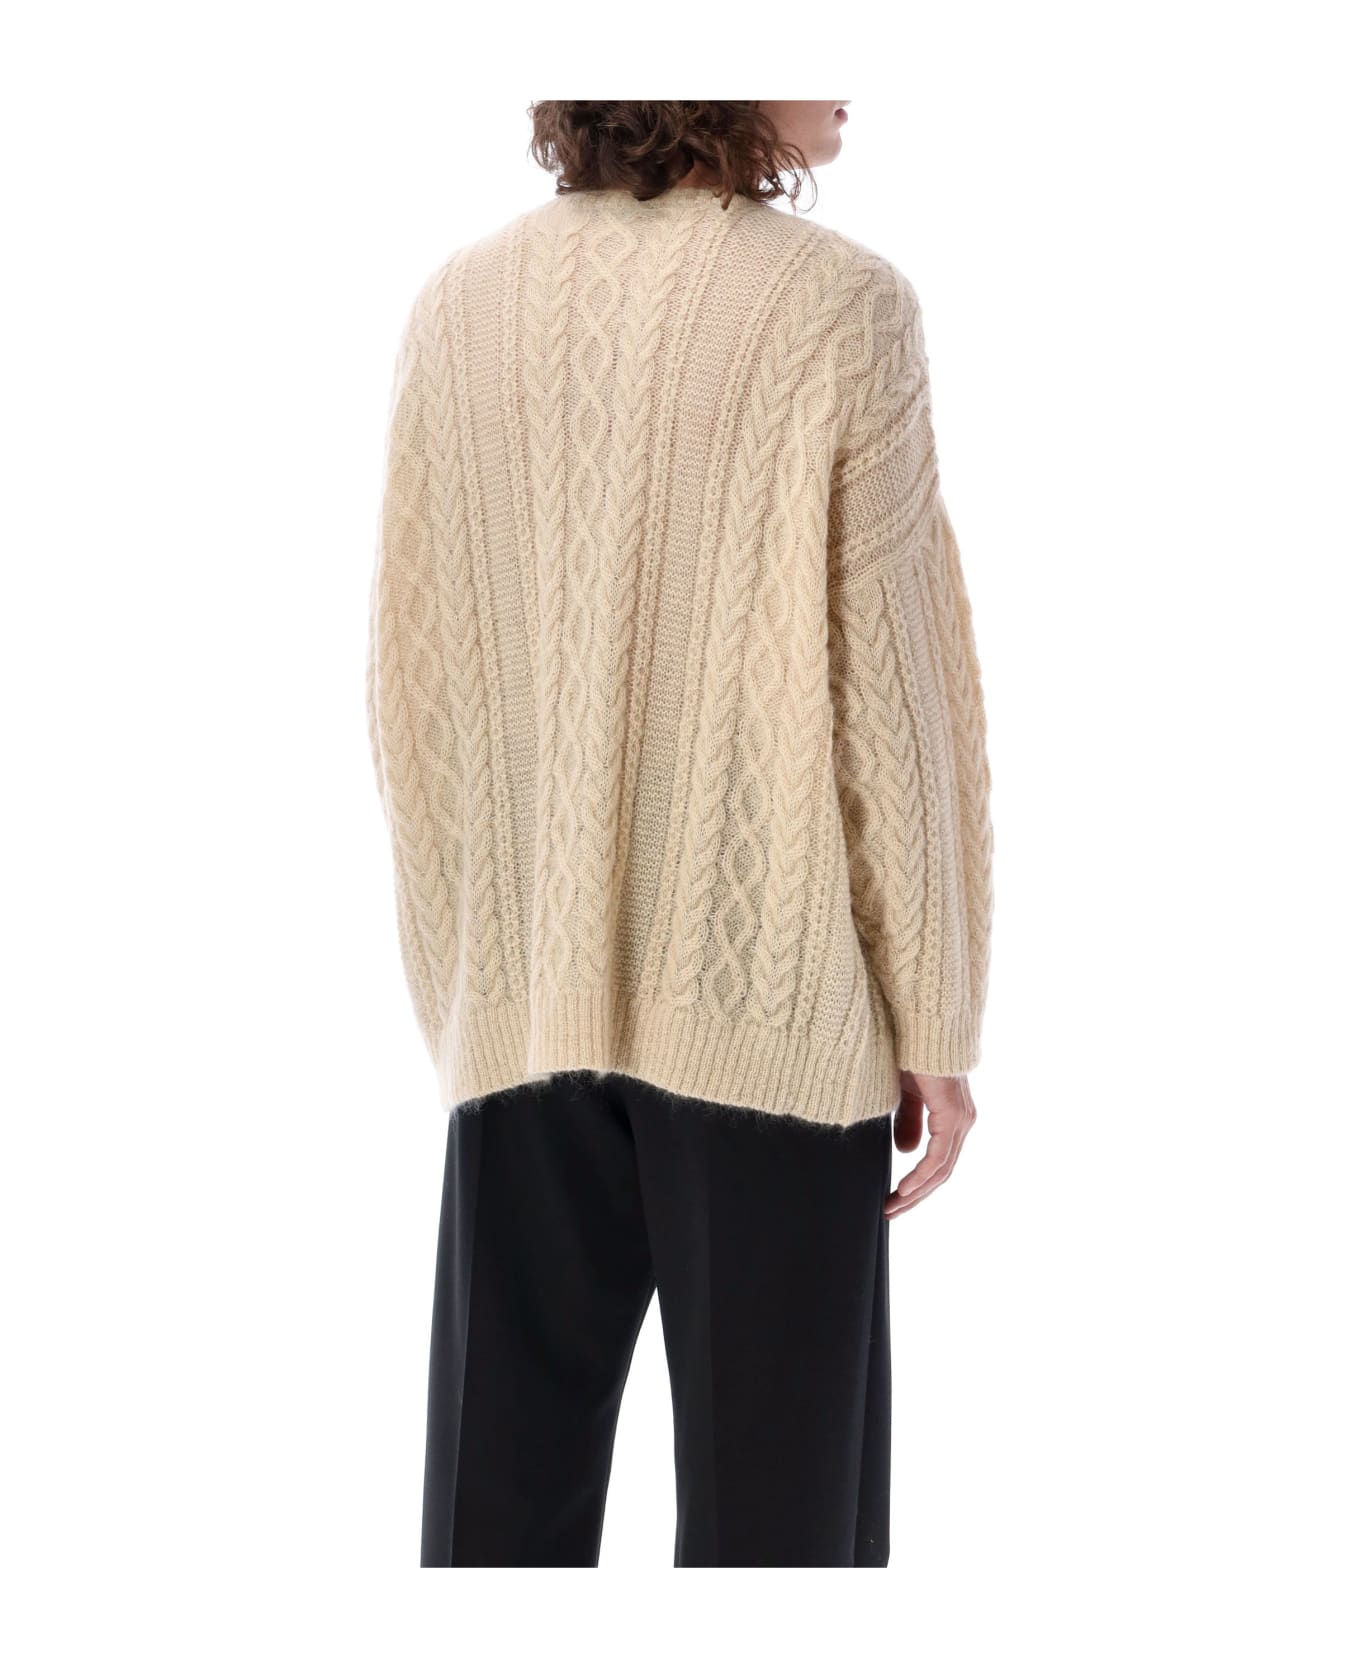 Undercover Jun Takahashi Cable Knit Sweater - IVORY